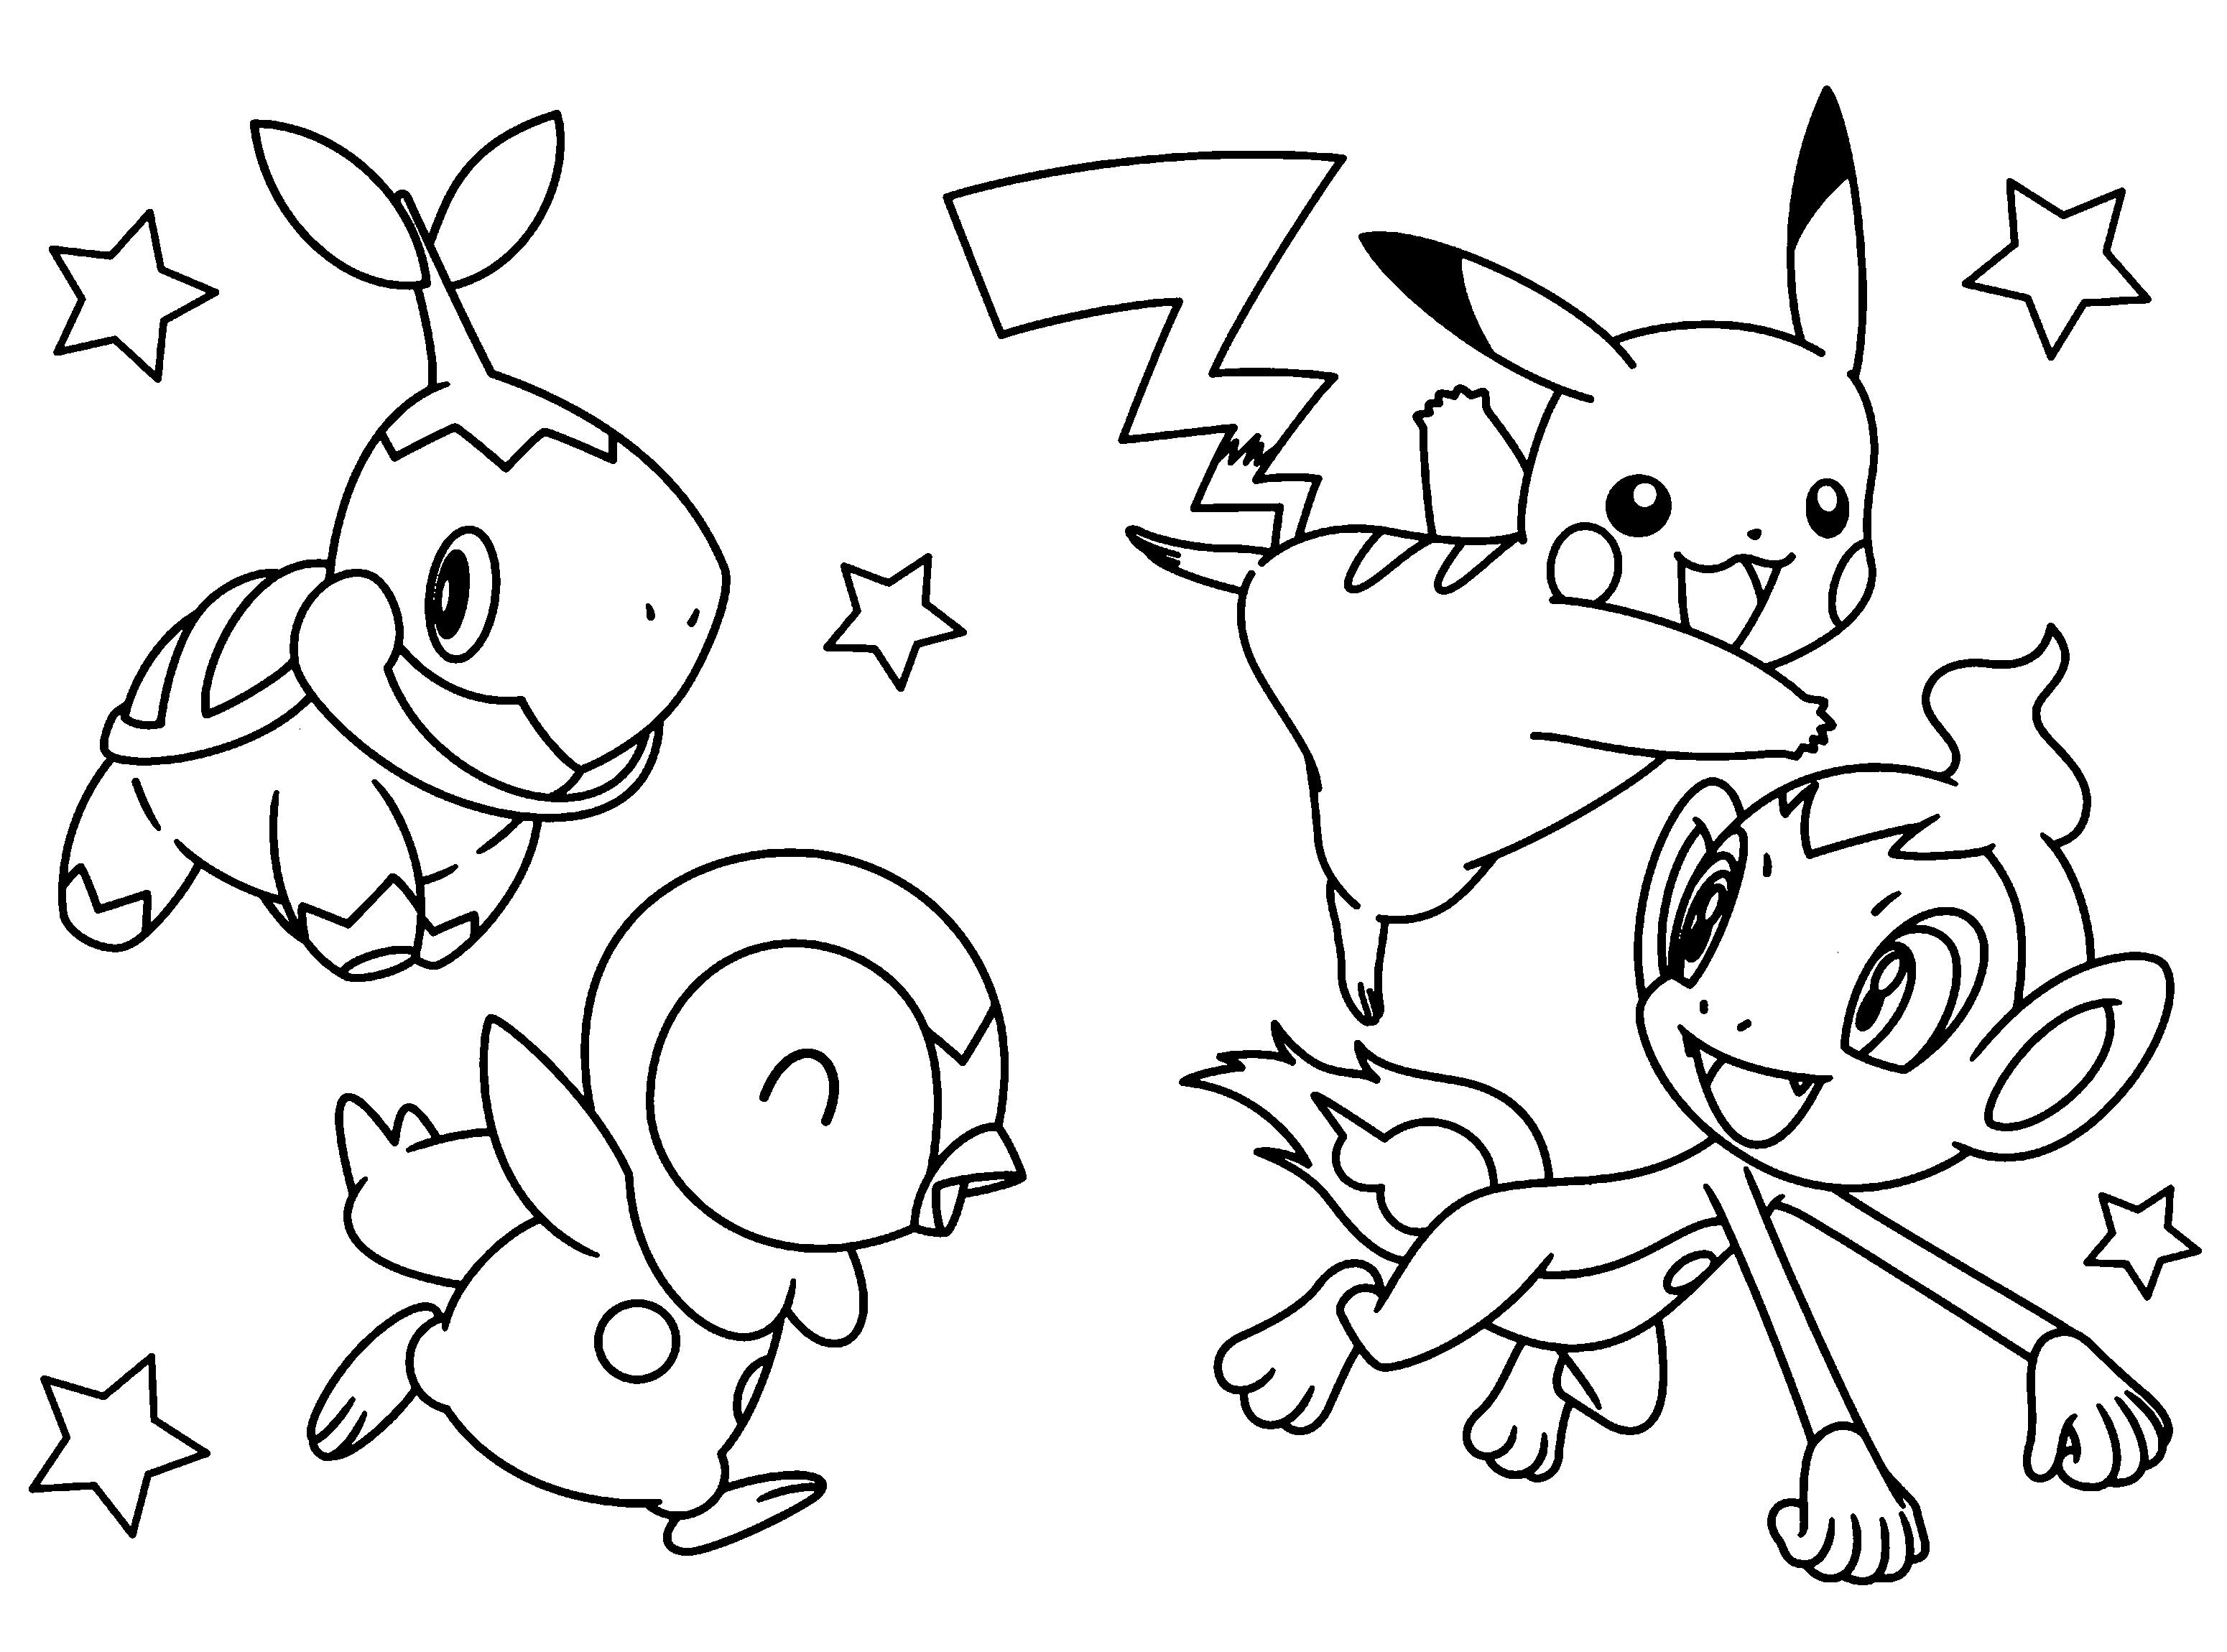 Pokemon coloring page to download for free